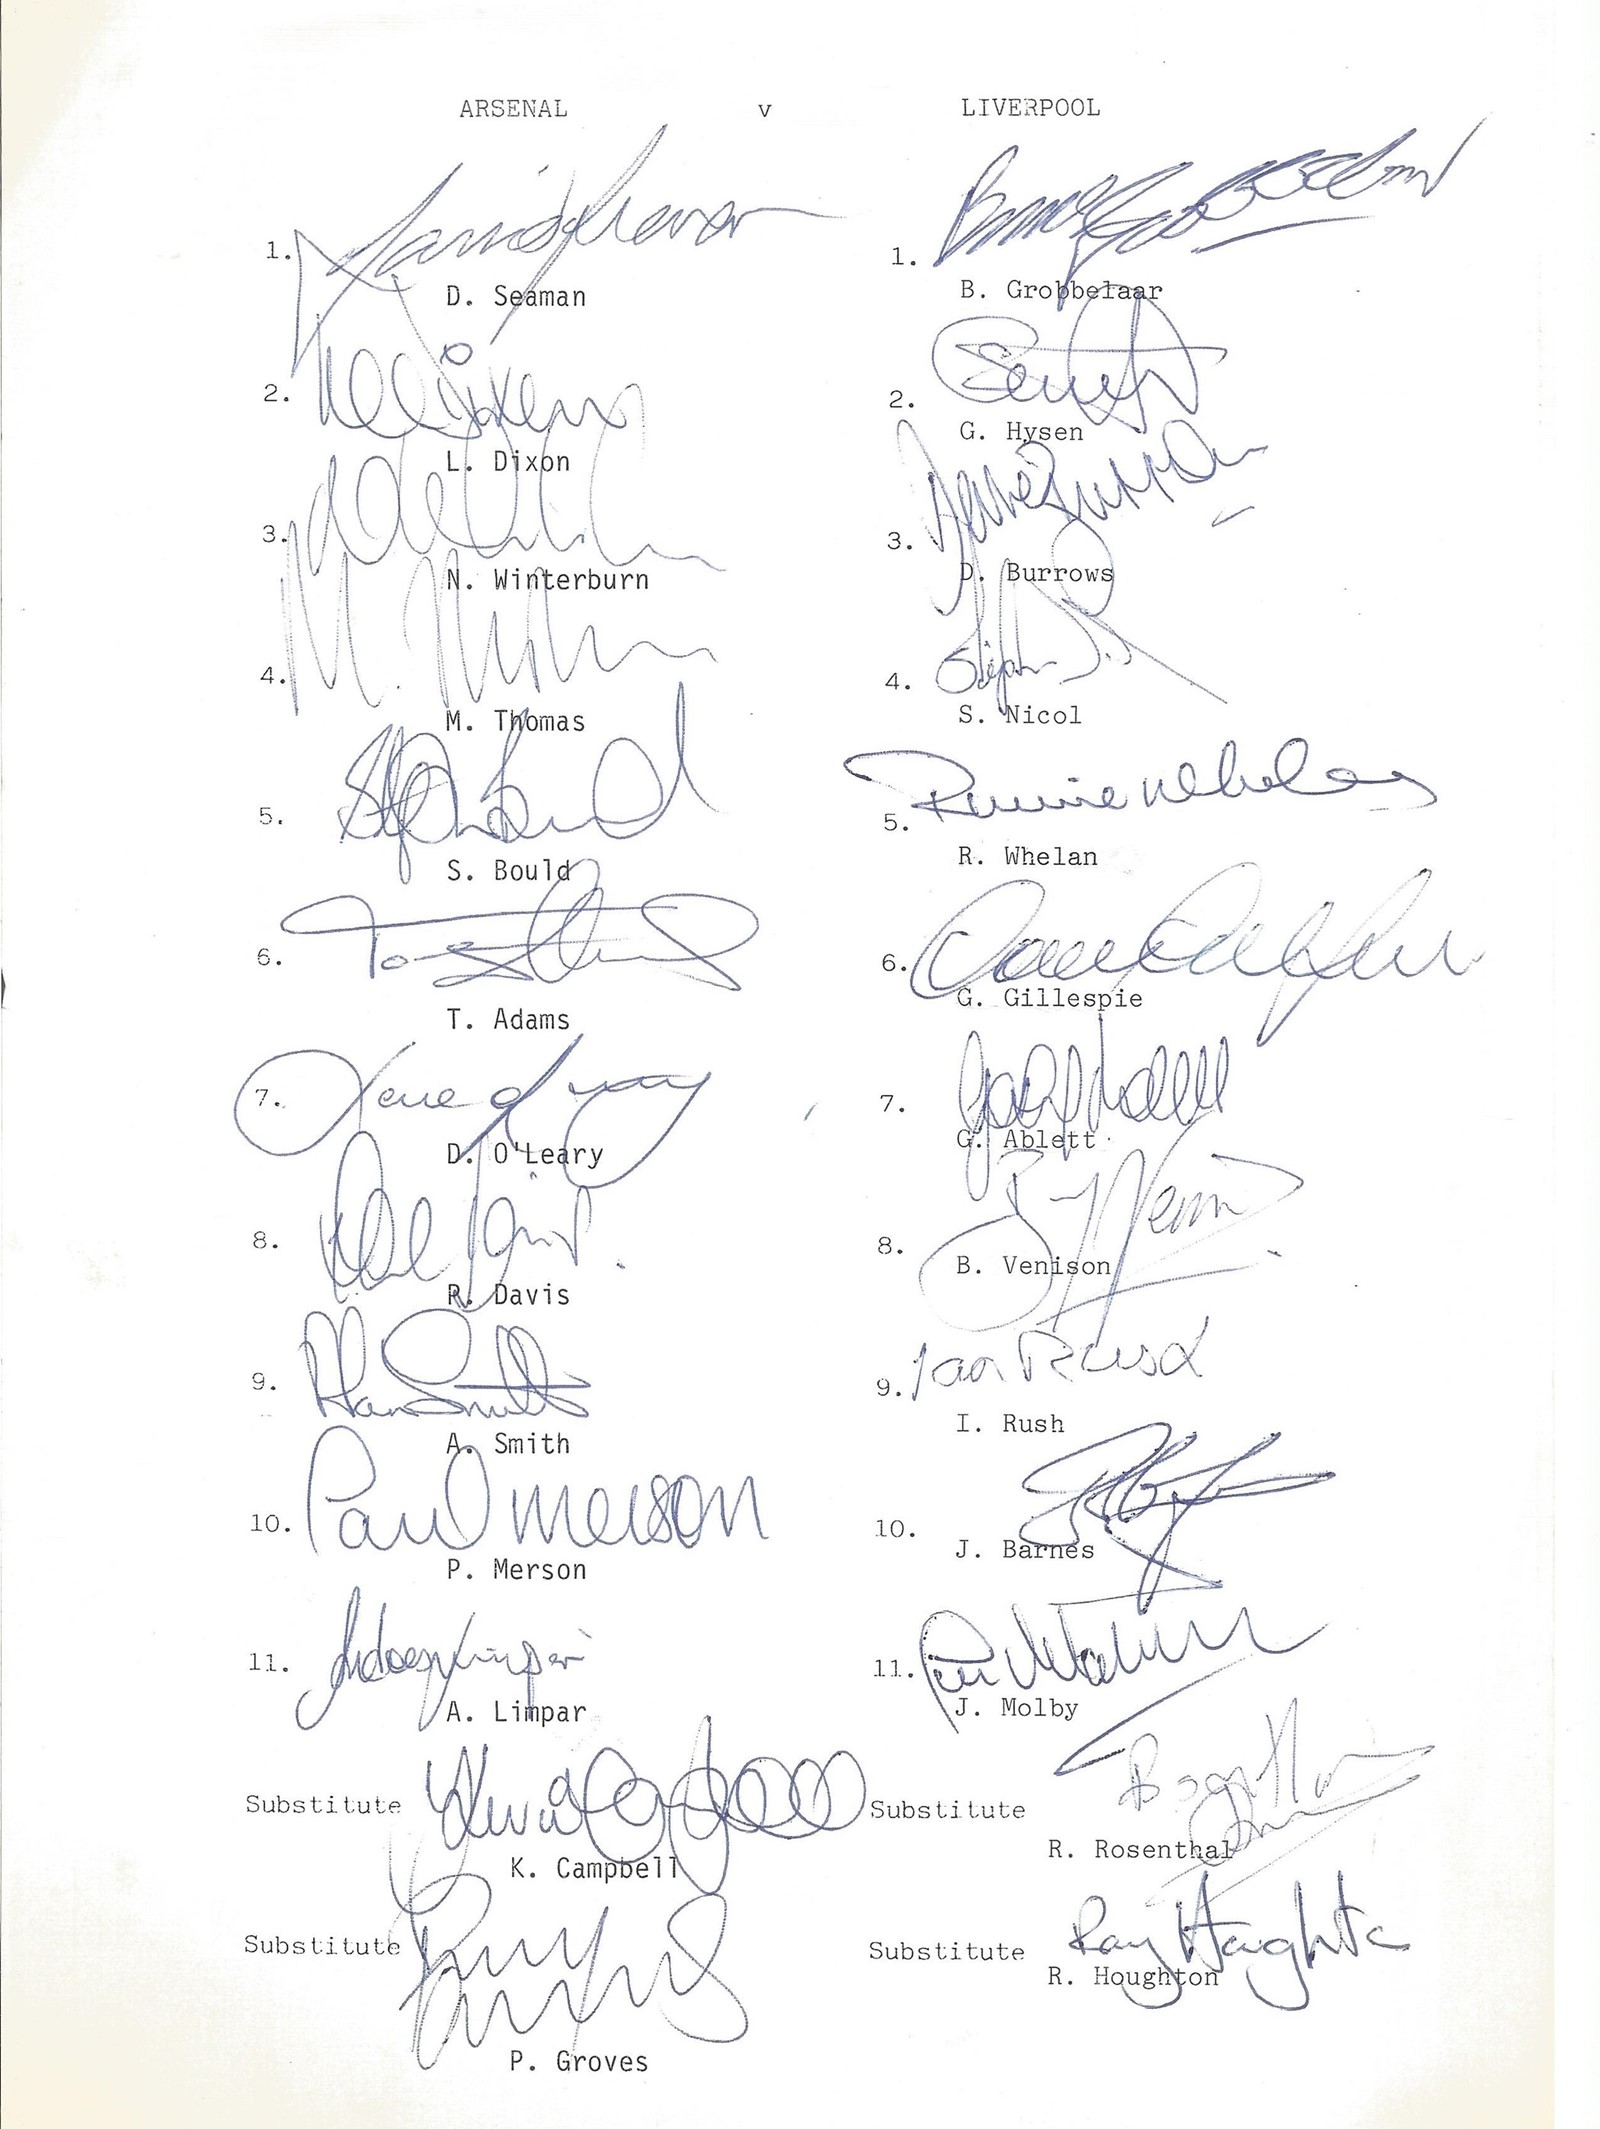 Football multi signed Arsenal v Liverpool A4 team sheet 26 fantastic signatures includes great names